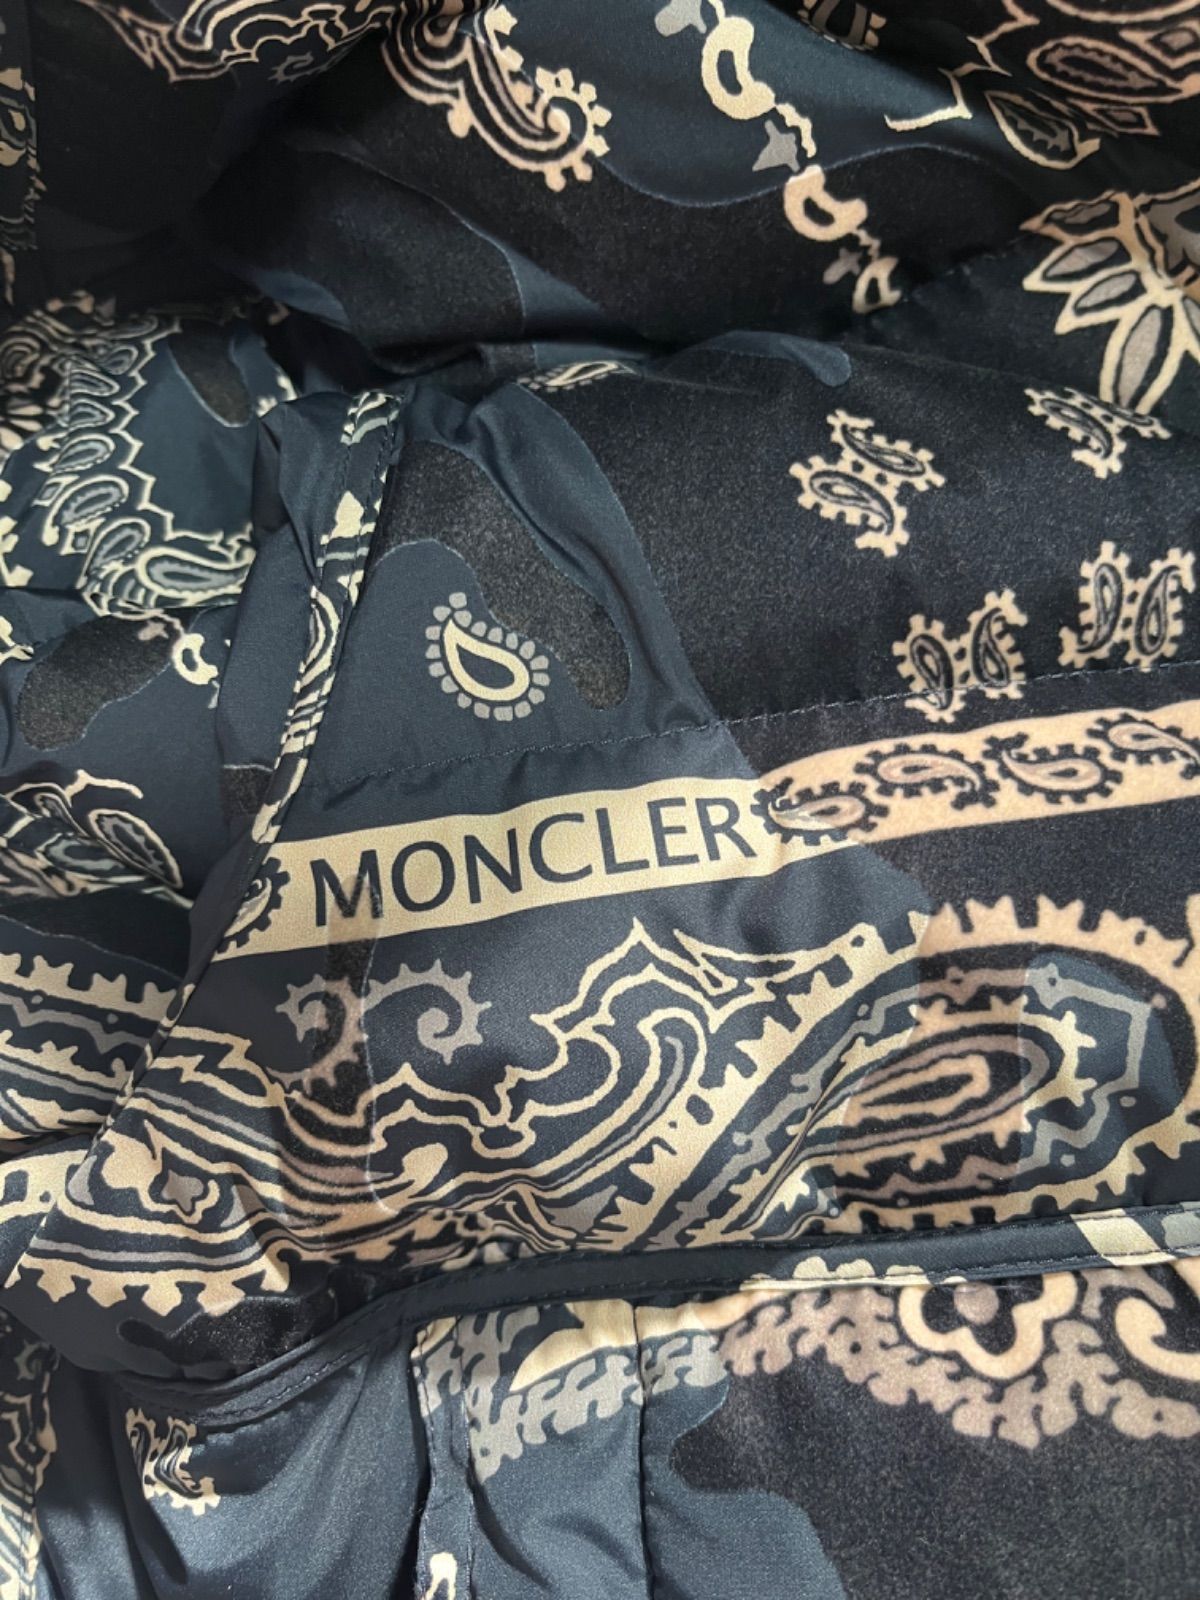 【Moncler】FREVILLE 美品/モンクレール　リバーシブル　ペイズリー